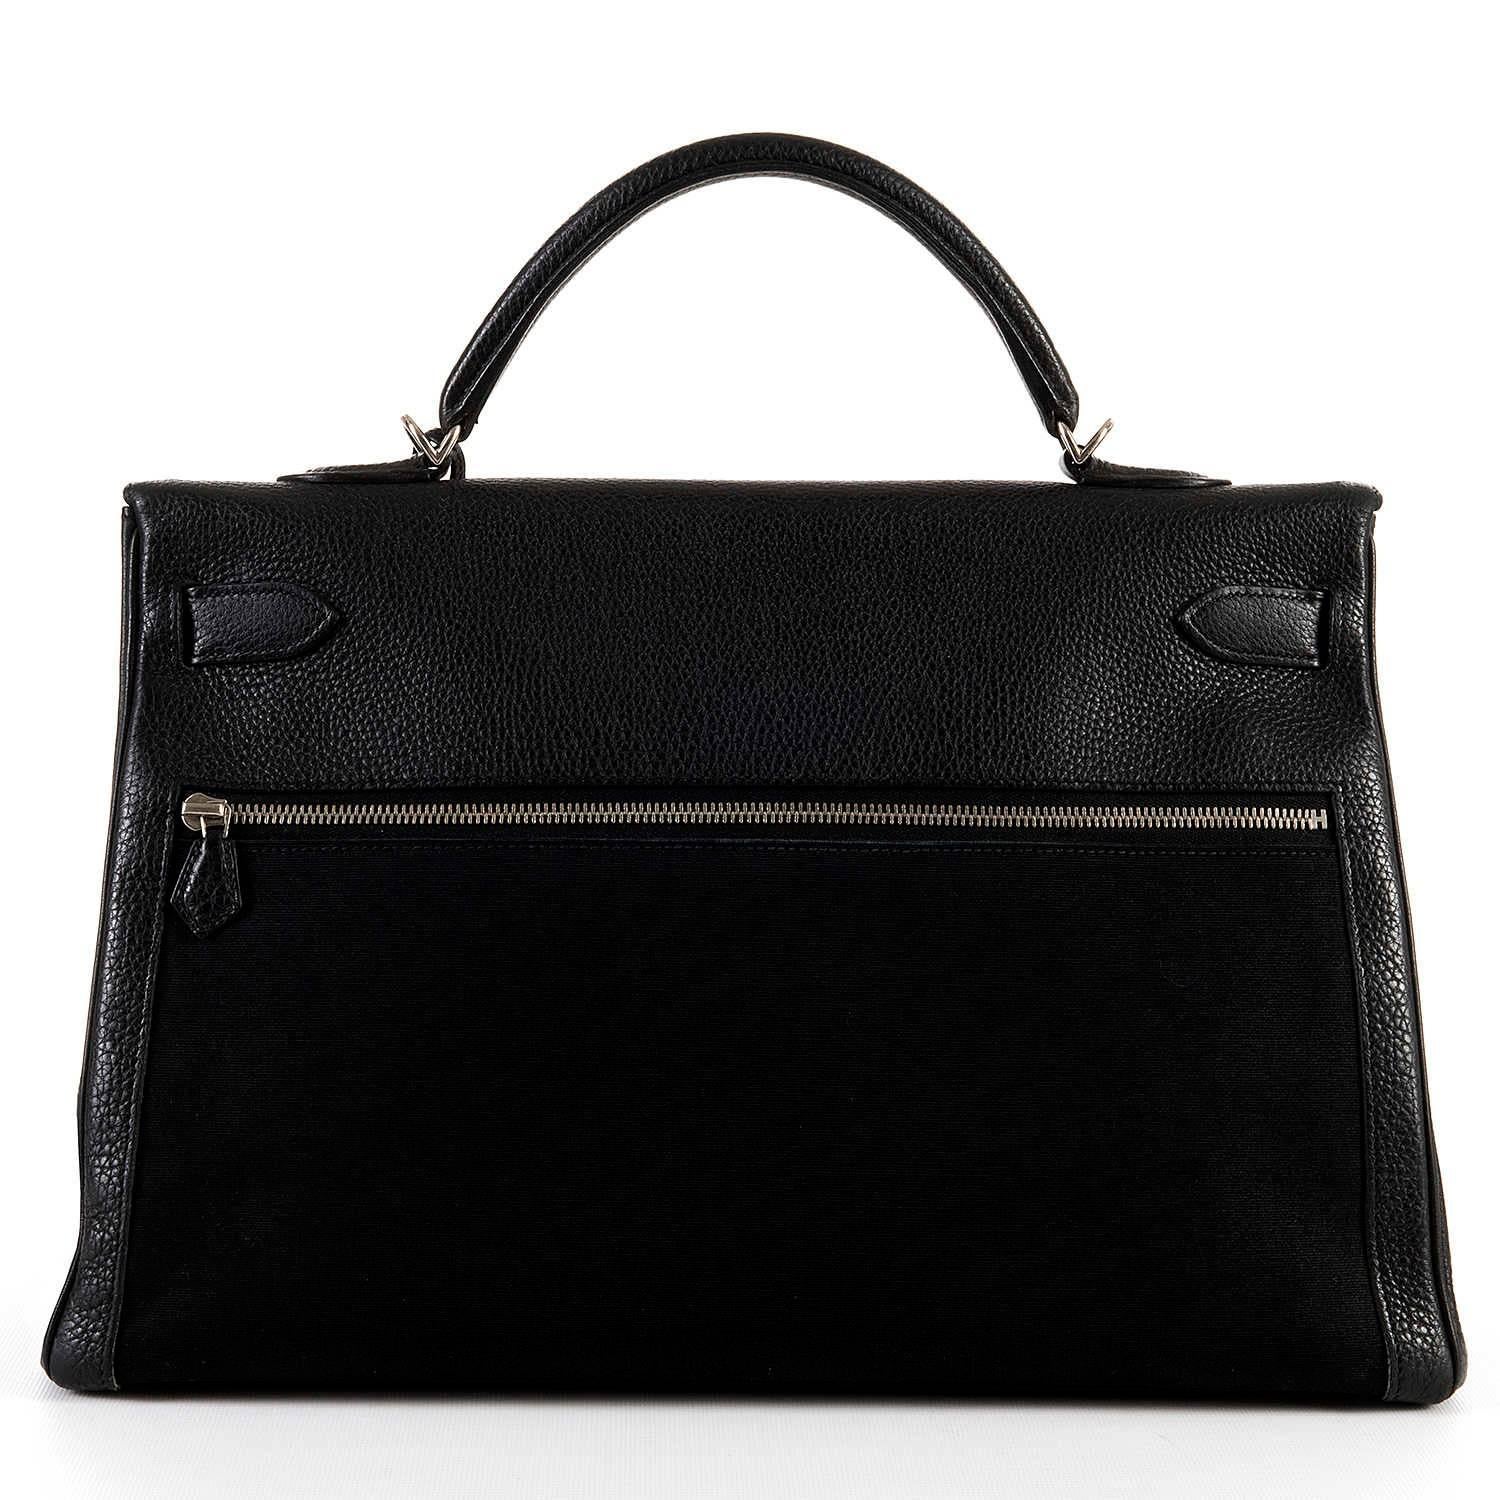 The Hermes Kelly 'Lakis' Bag is a unique take on the classic, famous and always fashionable Kelly style. Originally created exclusively for Jackie Onassis, the Lakis bag is very rare and highly collectable. The 'Lakis' has updated the demure Kelly